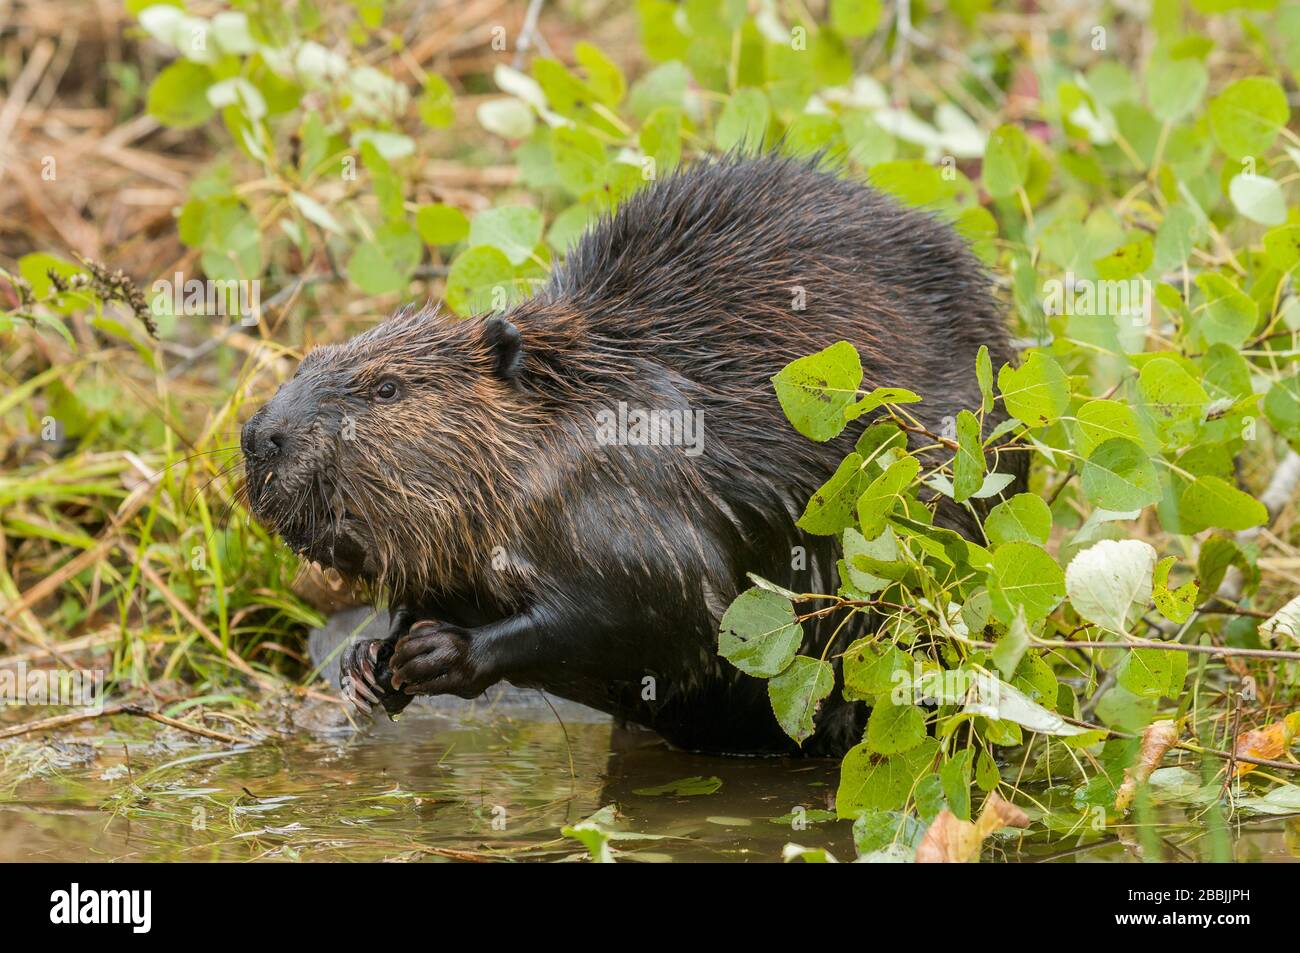 American Beaver (Castor canadensis), feeding on Quaking Aspen (Populus tremuloides), North America, by Dominique Braud/Dembinsky Photo Assoc Stock Photo